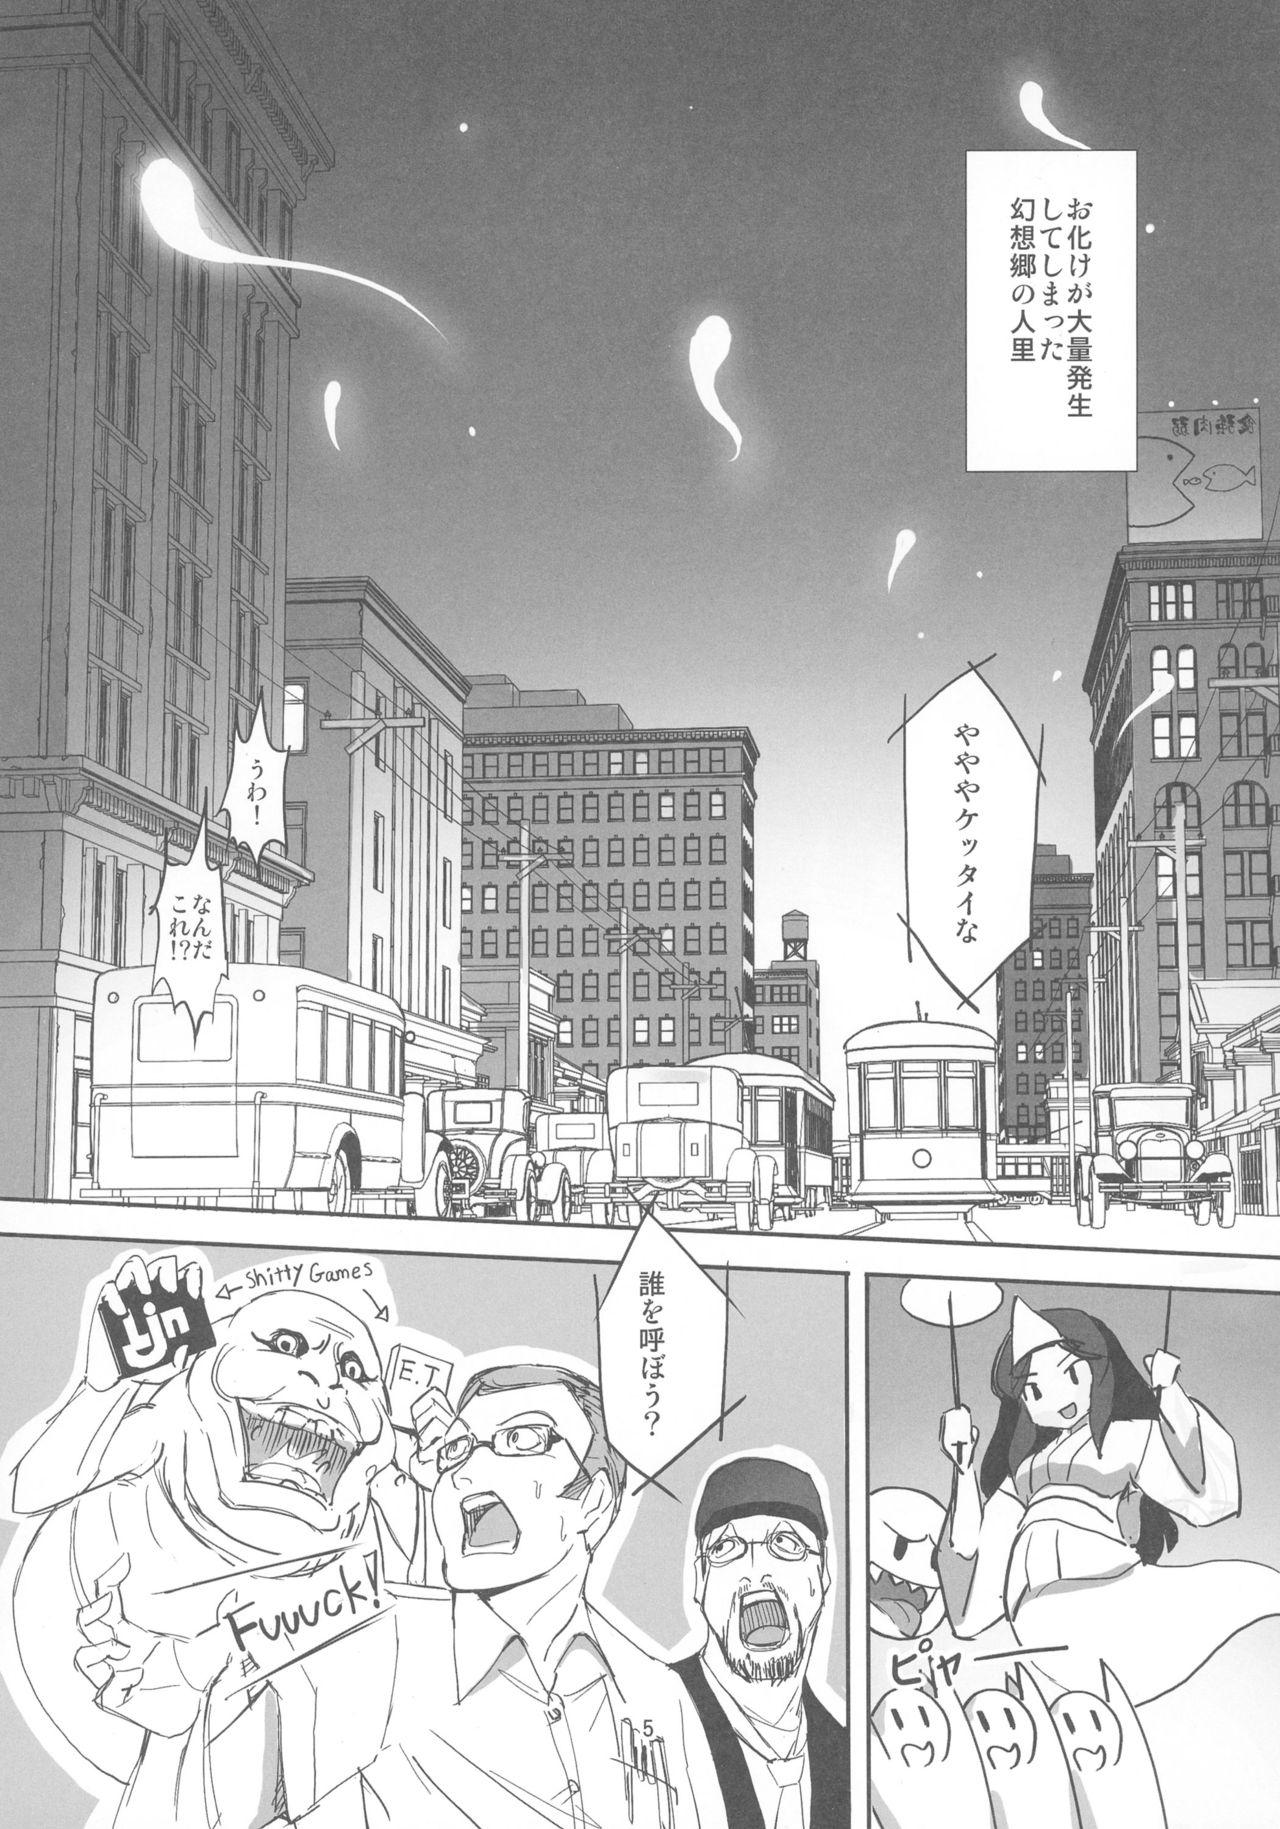 Lez TFC BUSTERS - Touhou project Ghostbusters Scene - Page 5